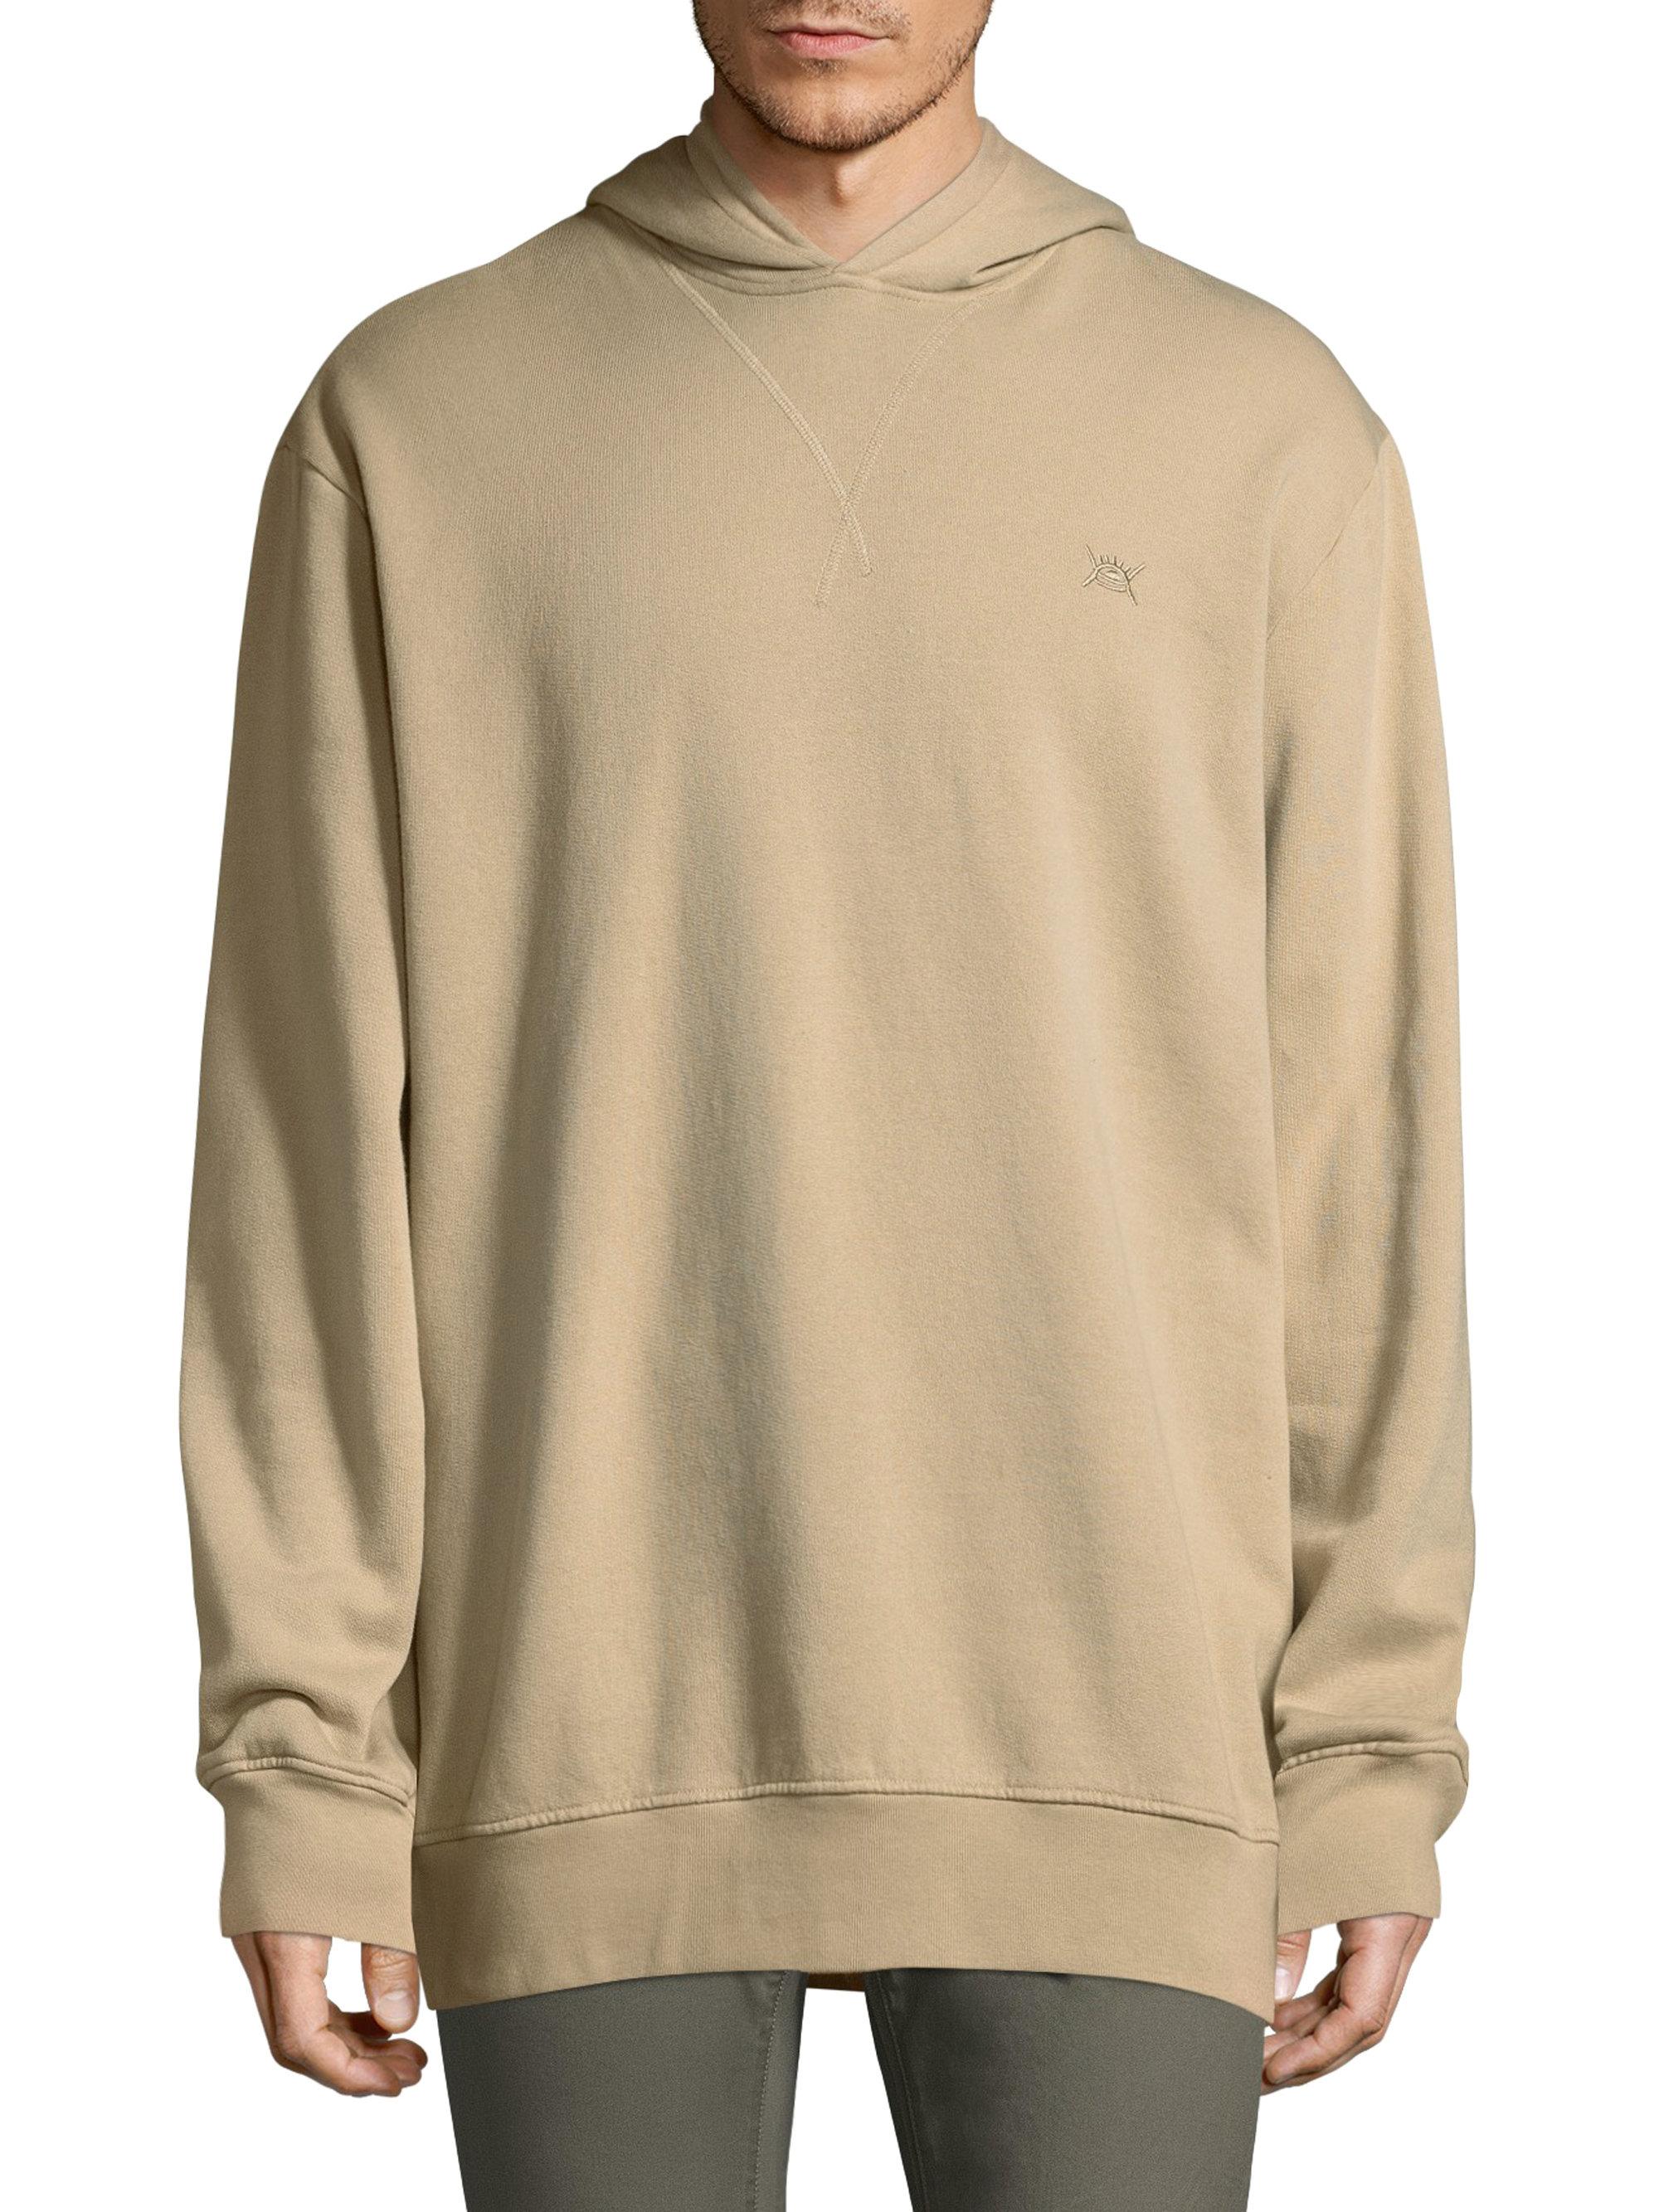 Lyst - Wesc Massive Cotton Hoodie in Natural for Men